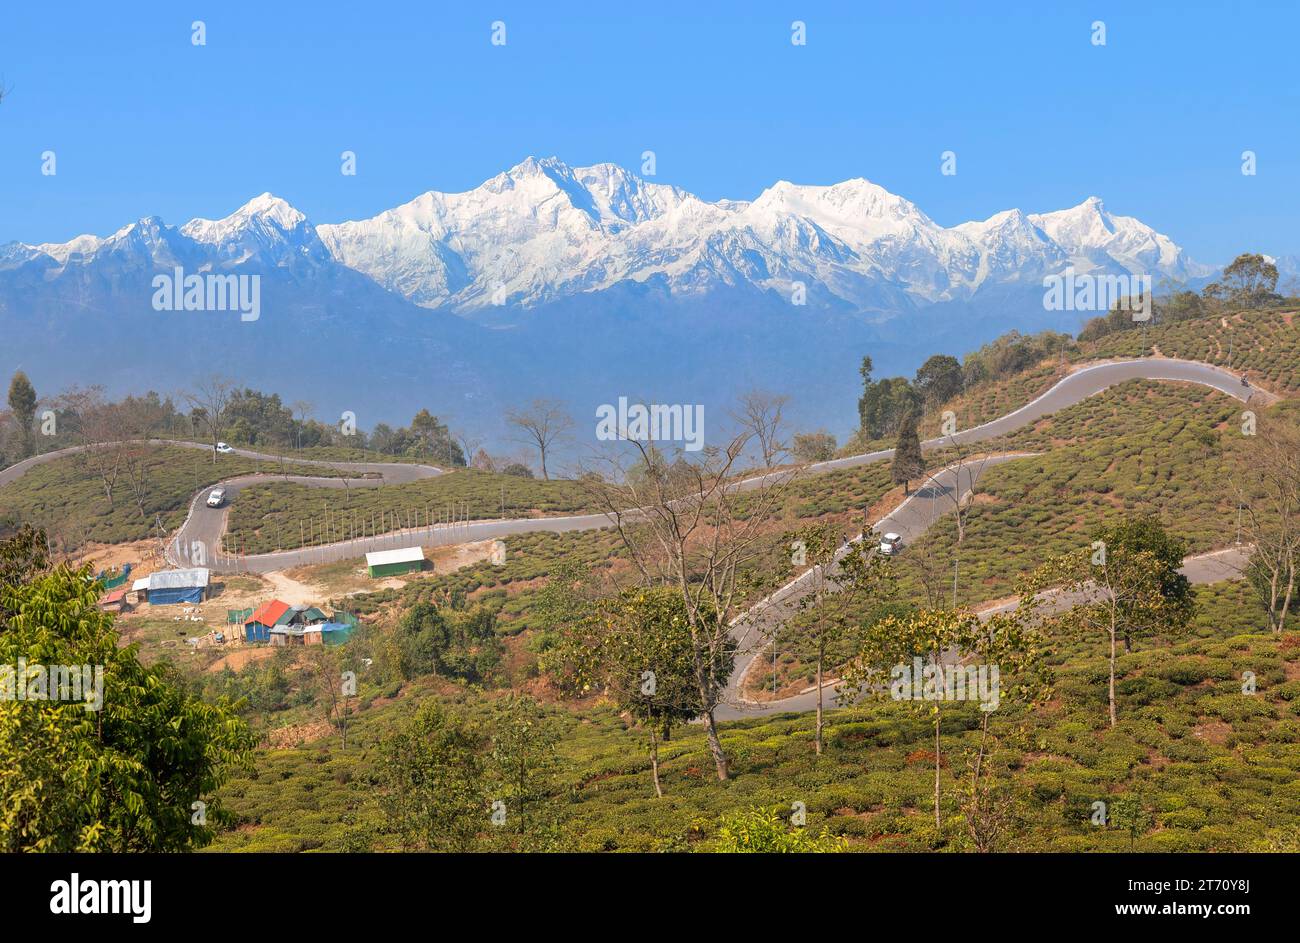 Winding mountain roads with tea plantations on the slopes and view of the Himalaya range Tinchuley in the district of Darjeeling, India Stock Photo